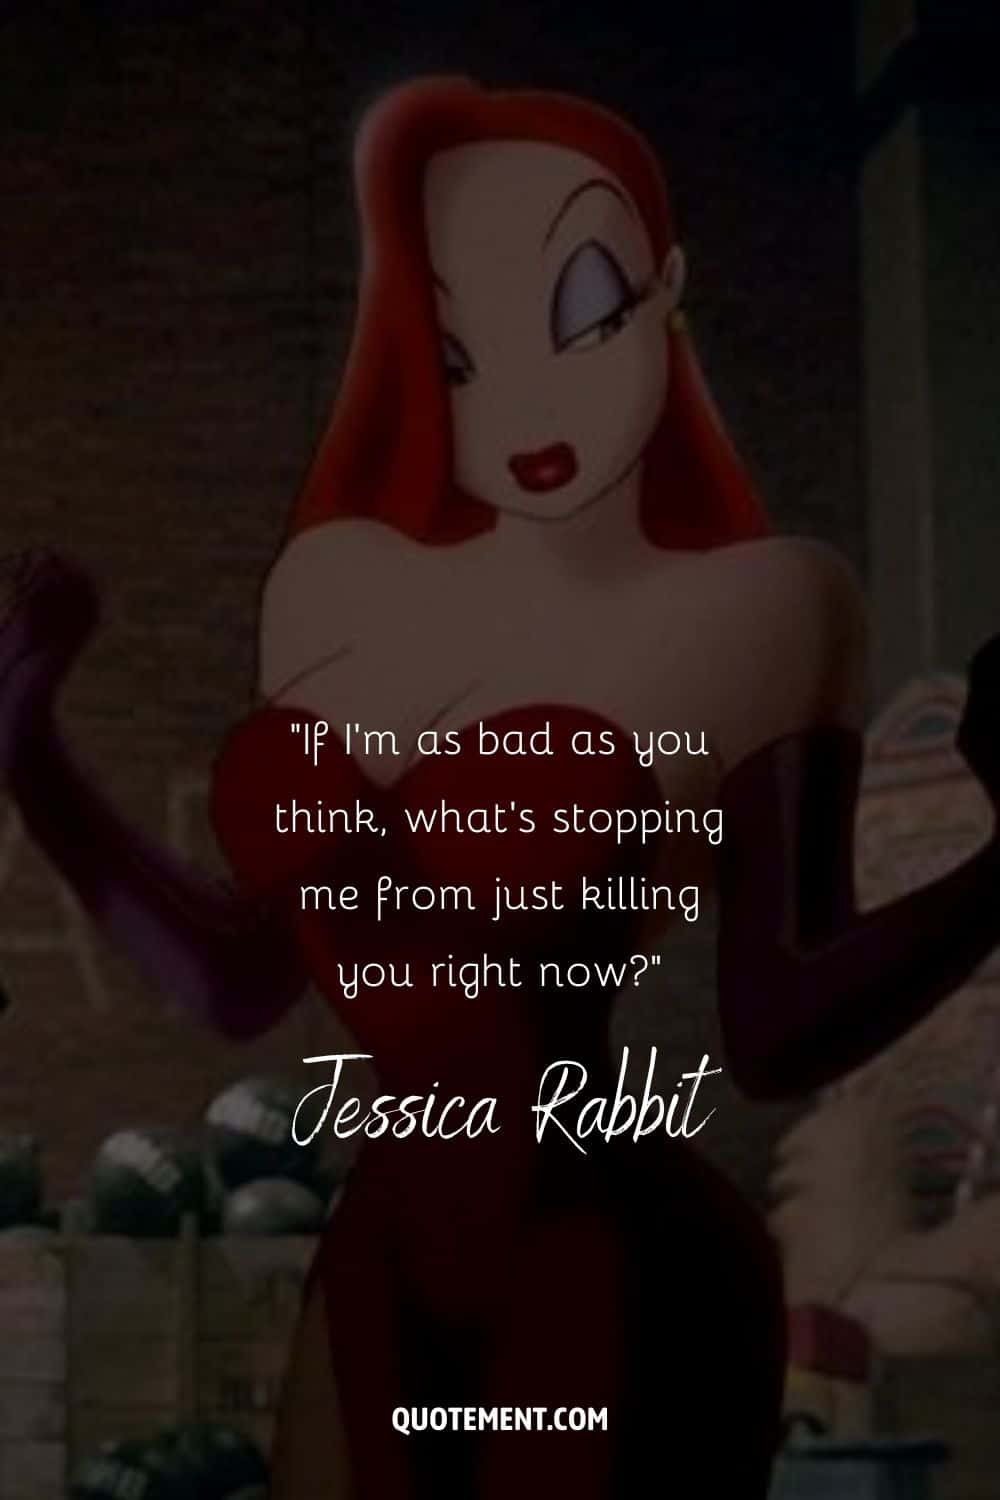 illustration of Jessica Rabbit with her famous quote
